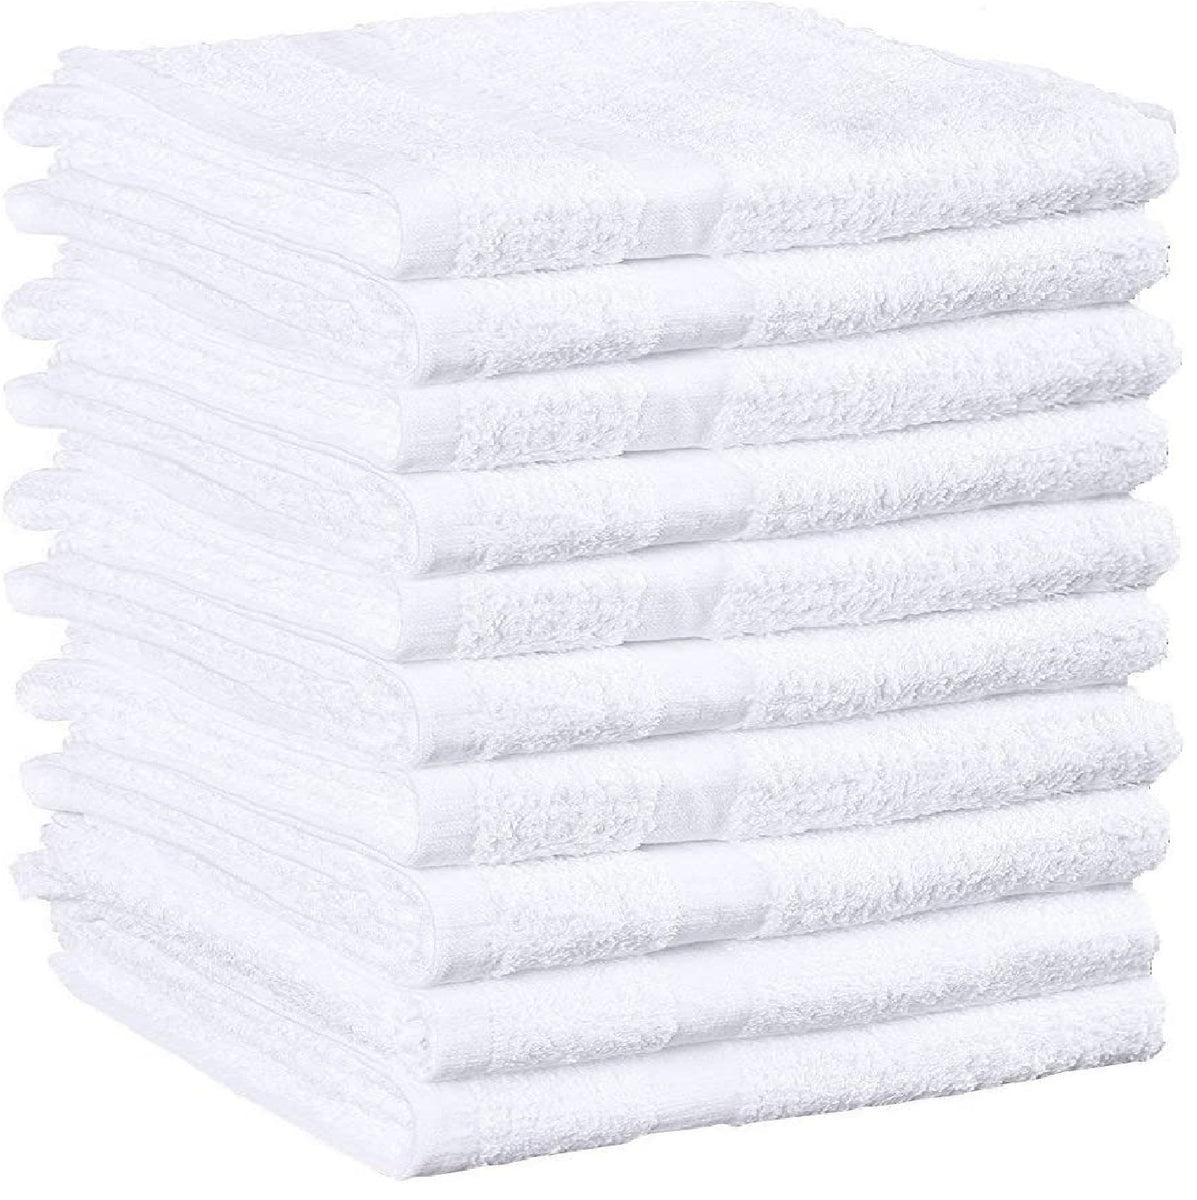 Towels N More - 6 Pack 22x44 Soft Gym Towels/Small Bath Towels White 100%  Ring Spun Loops - Home Essentials Lightweight Bathroom Towels Set - Ideal